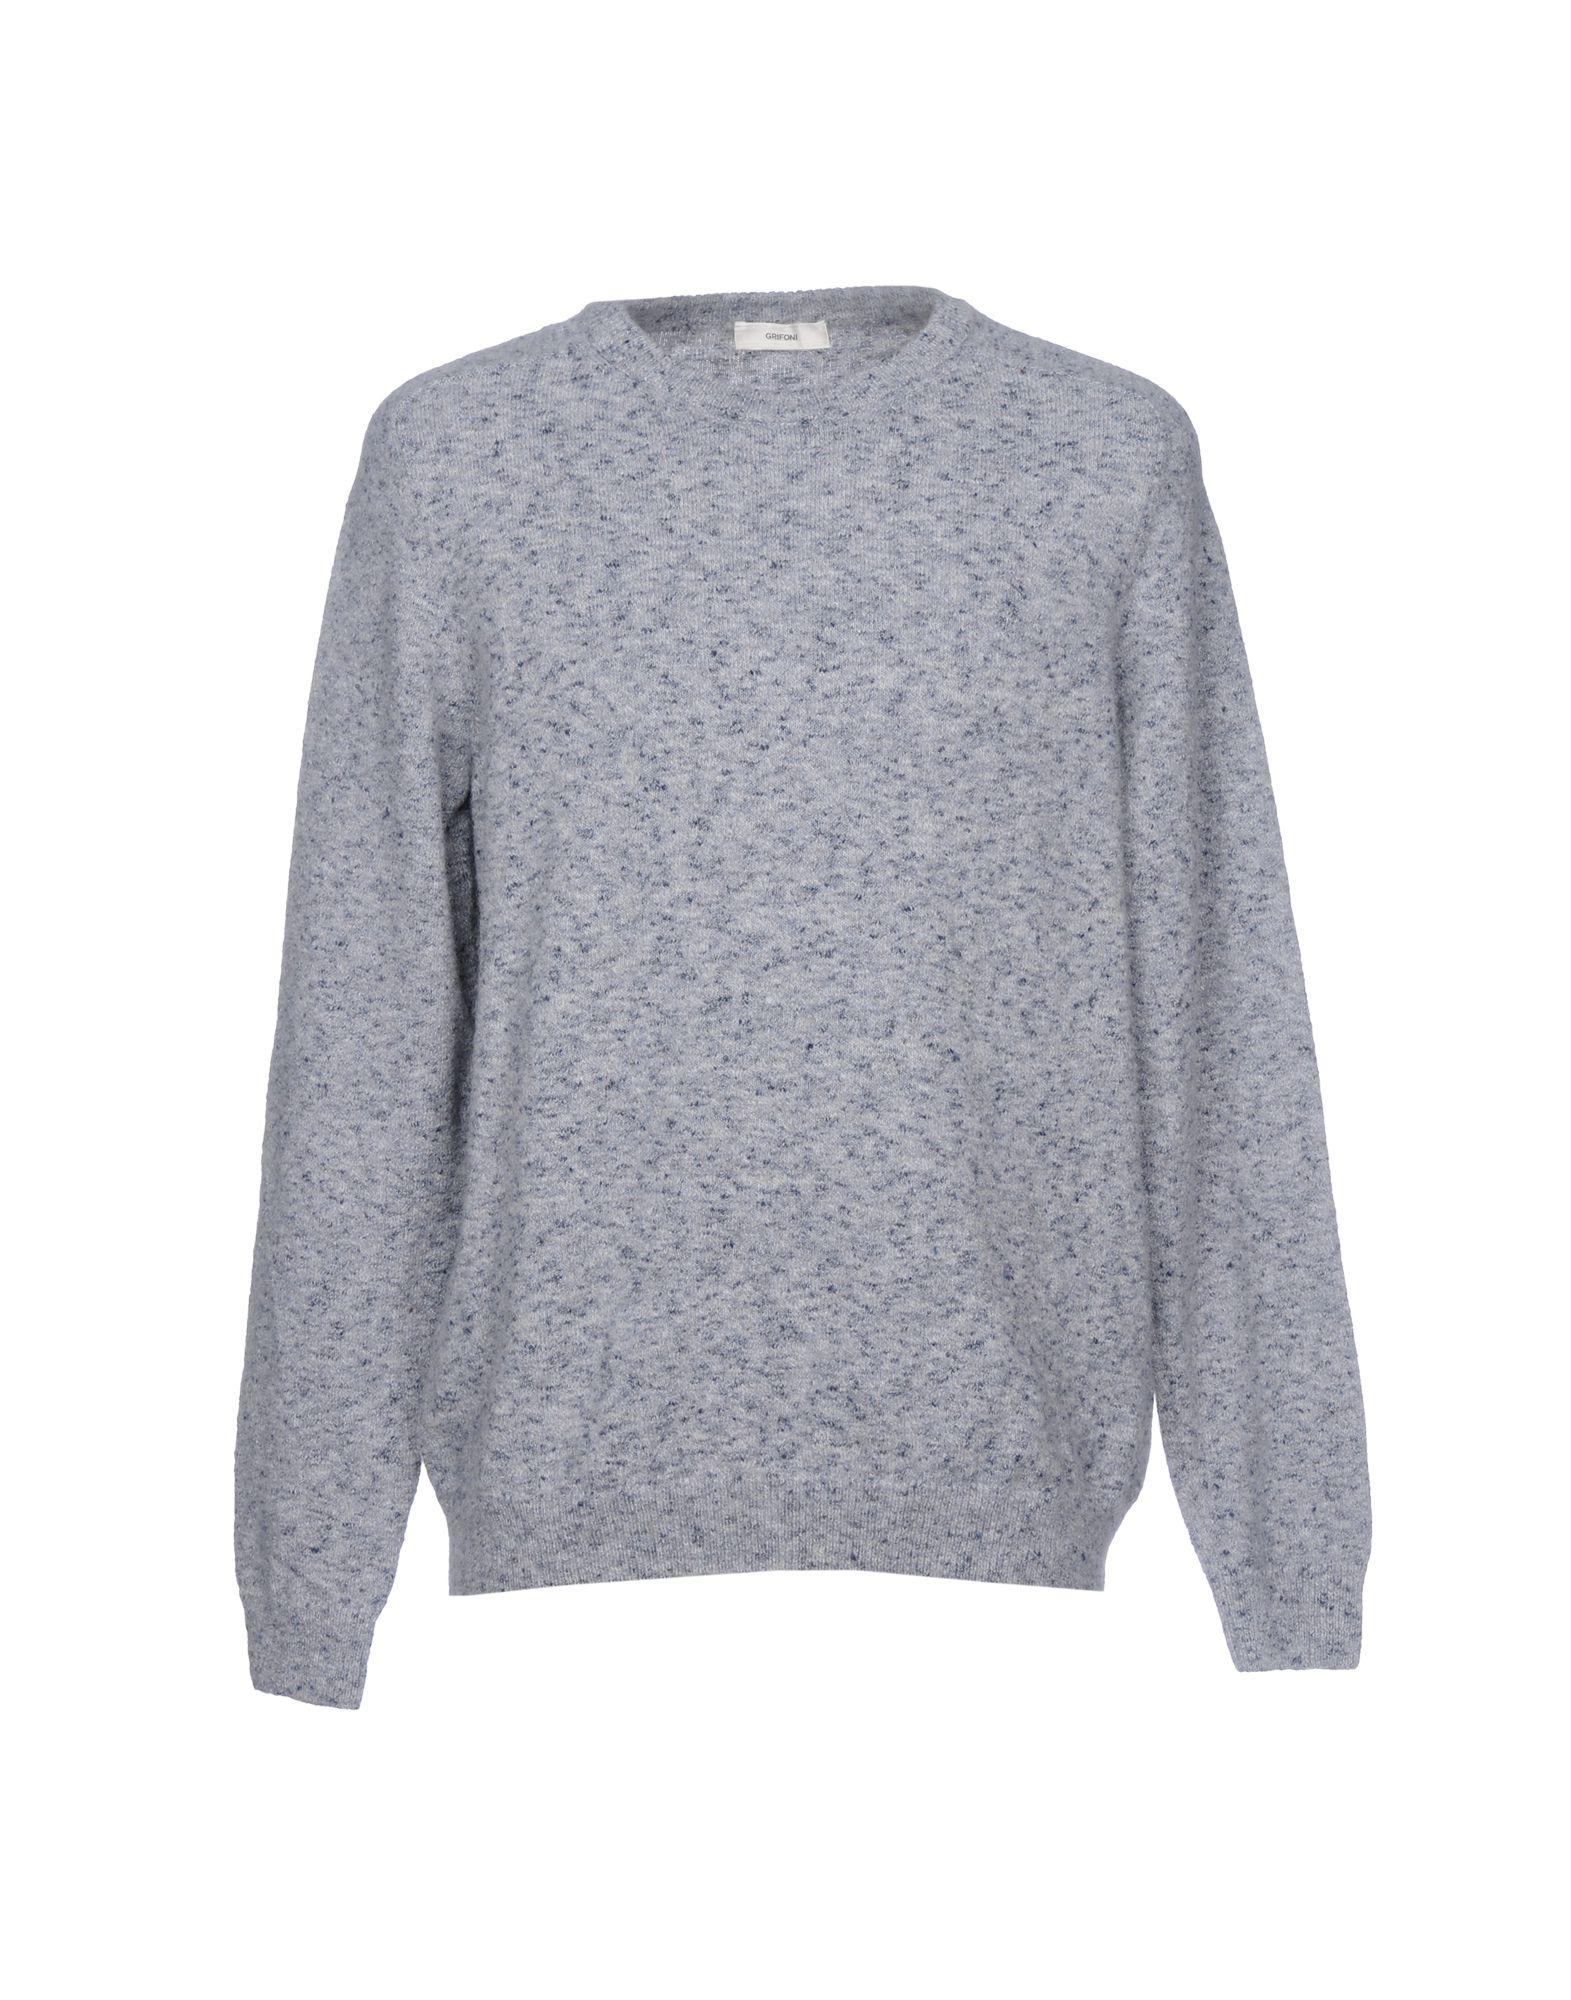 Mauro Grifoni Sweater In Light Grey | ModeSens